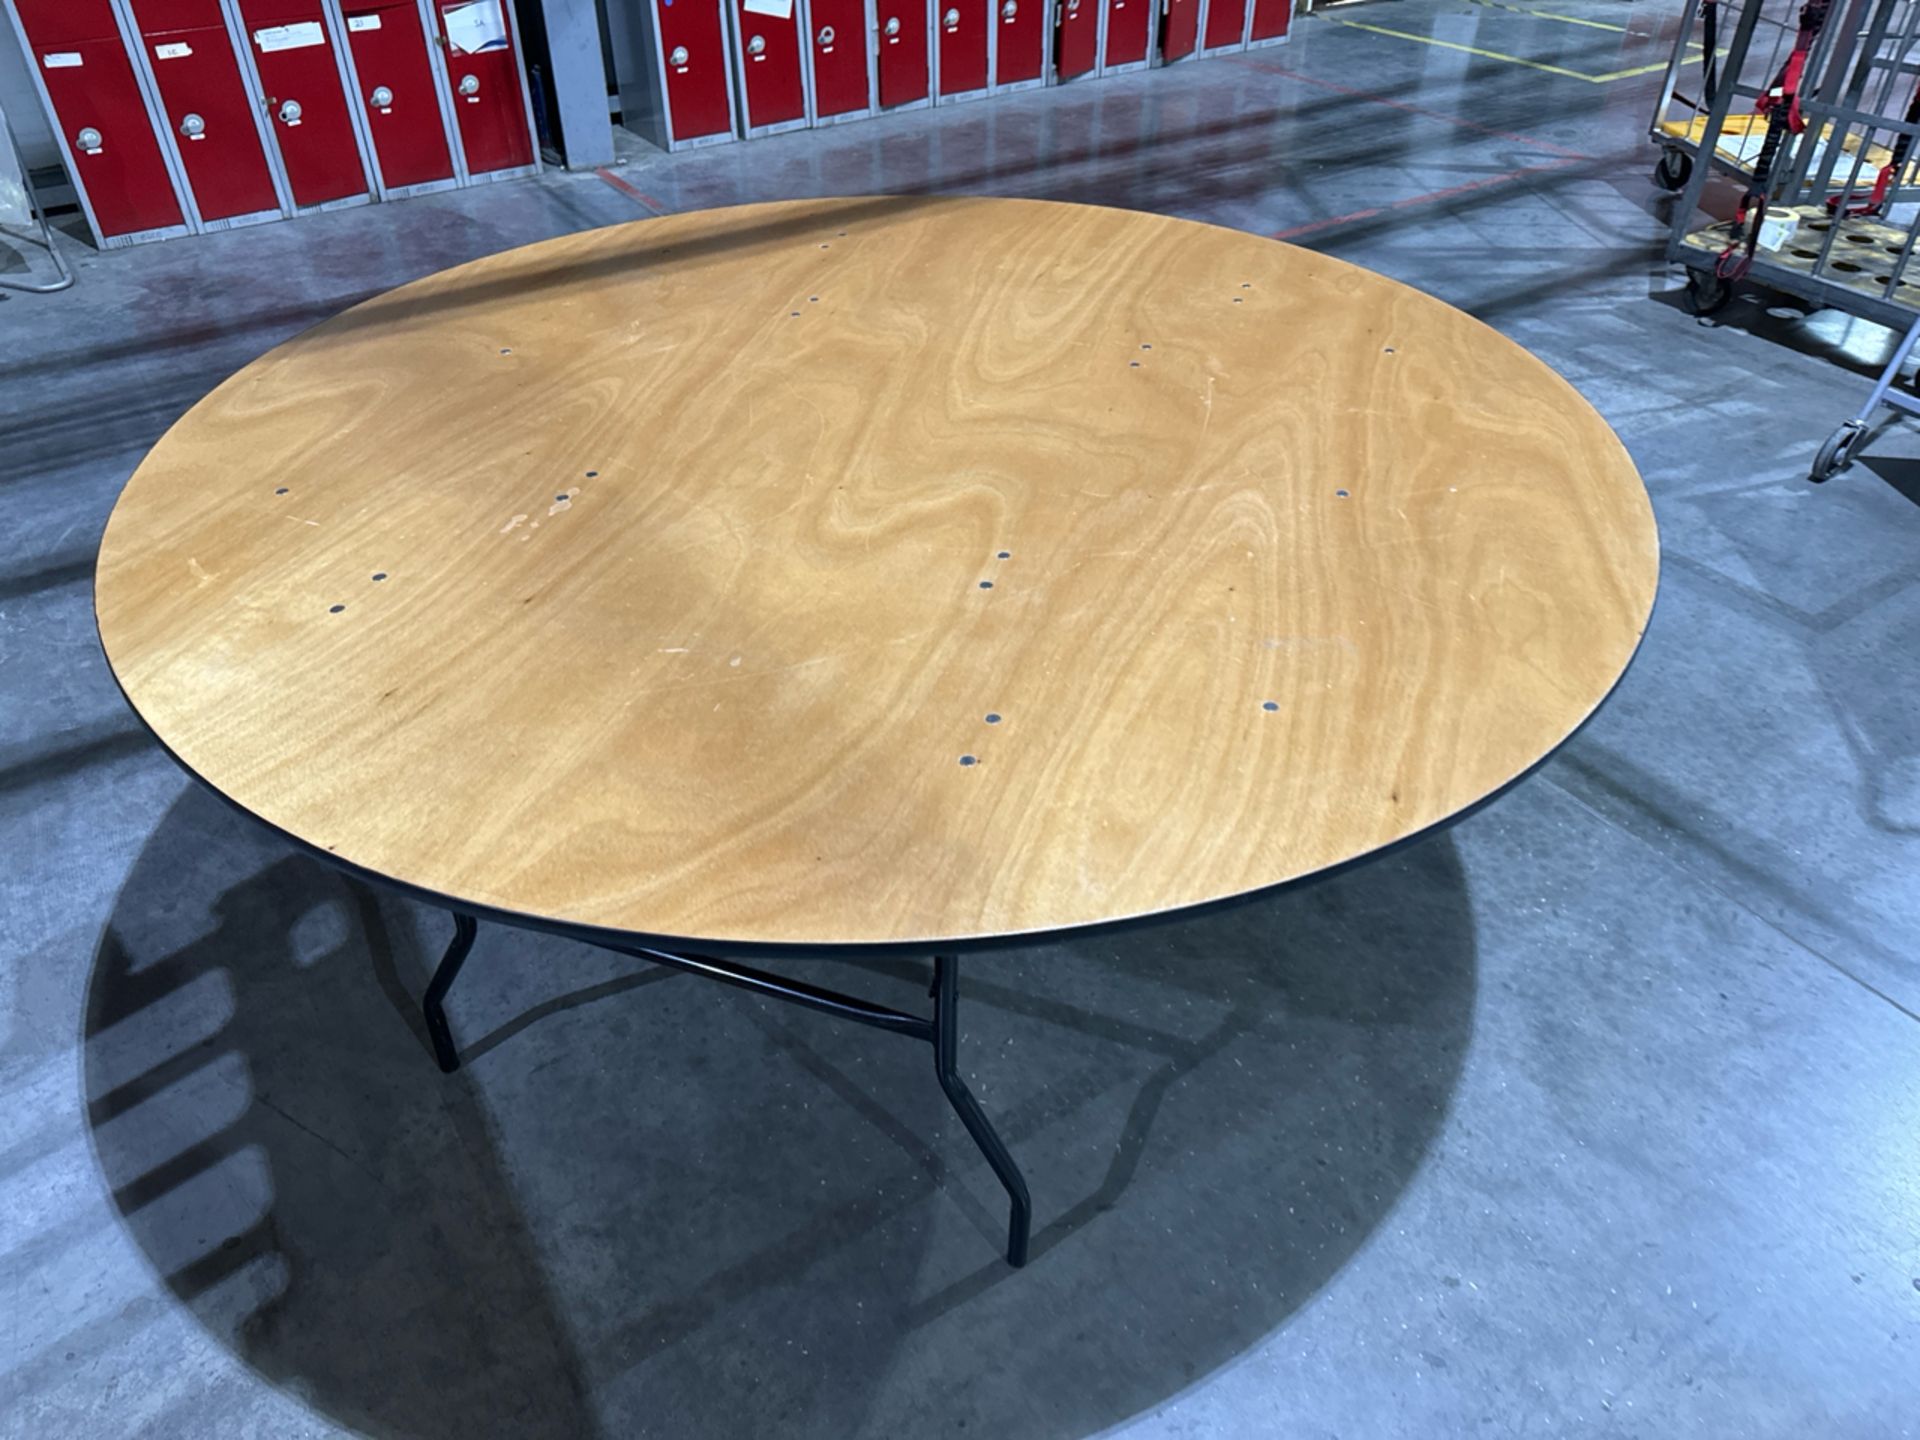 6ft Round Conference Table - Image 2 of 3